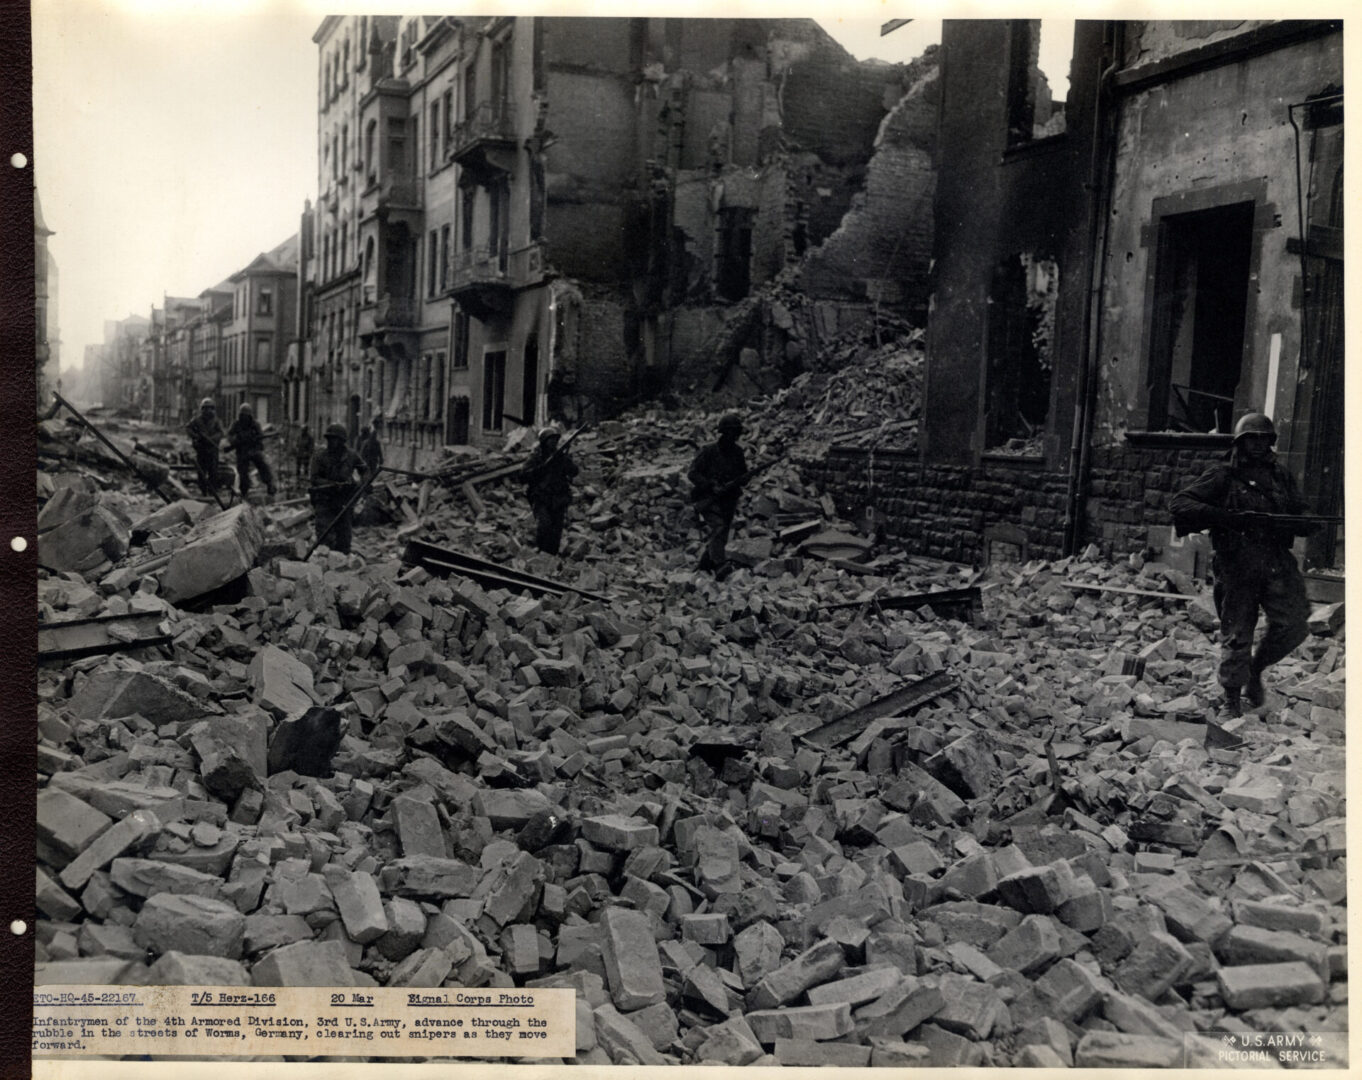 Soldiers advance through the rubbles in the streets